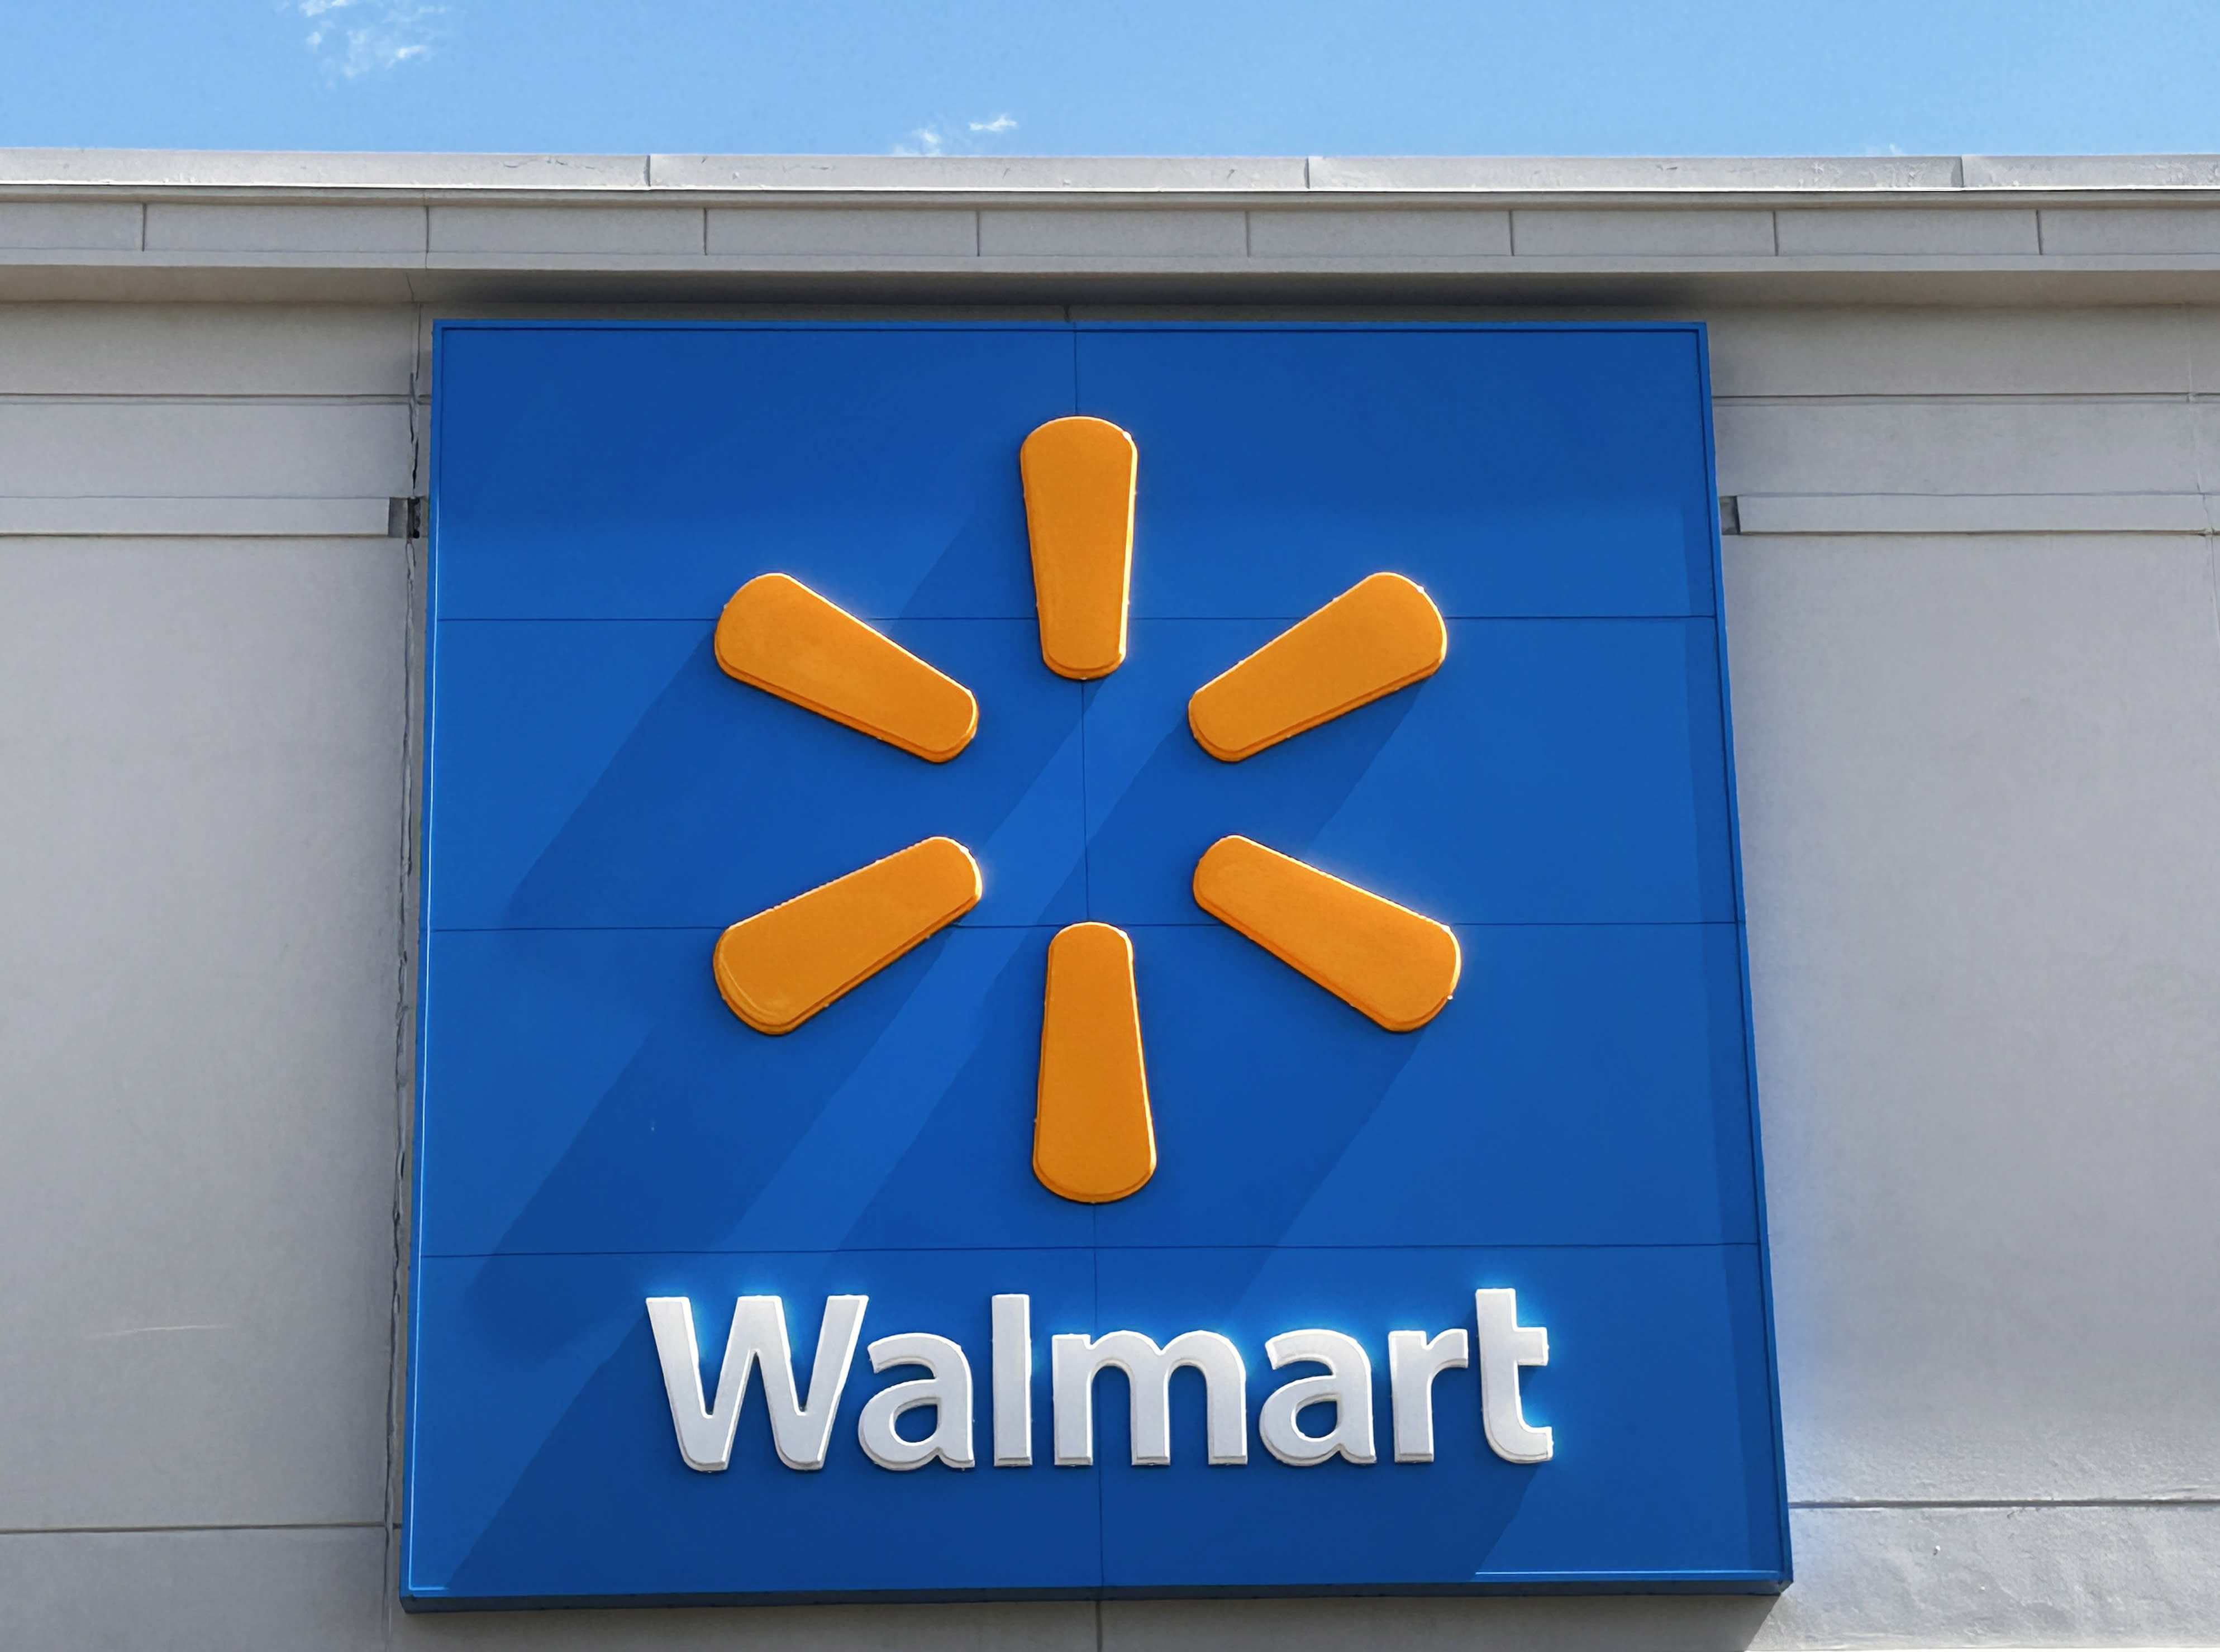 Walmart reportedly plans to lay off hundreds of the company’s employees and relocate others